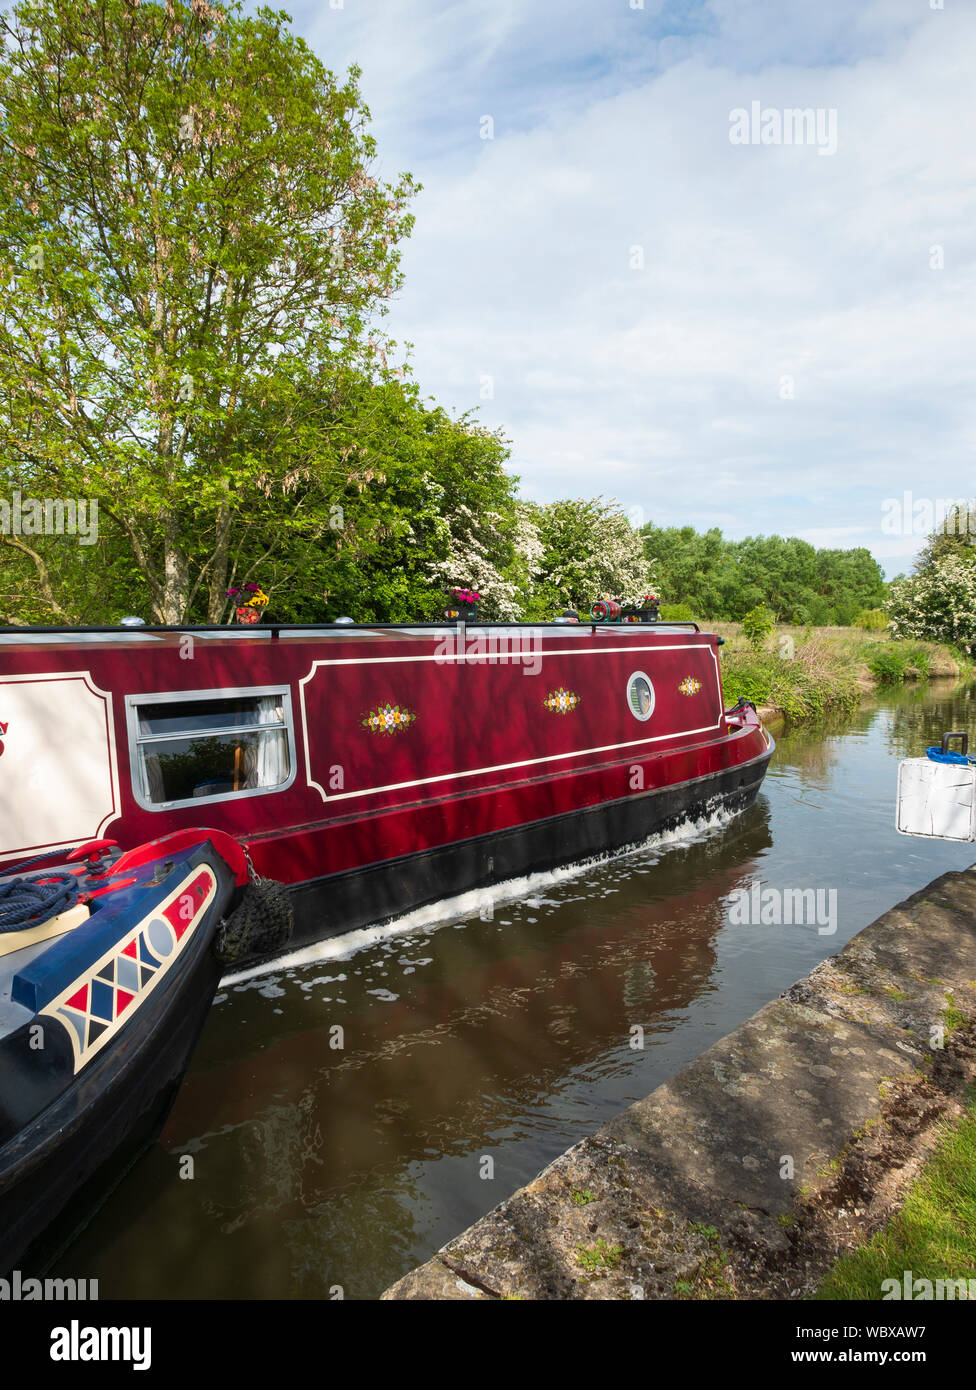 Canal boat in a lock, The Grand Union Canal, Northamptonshire, England, UK. Stock Photo